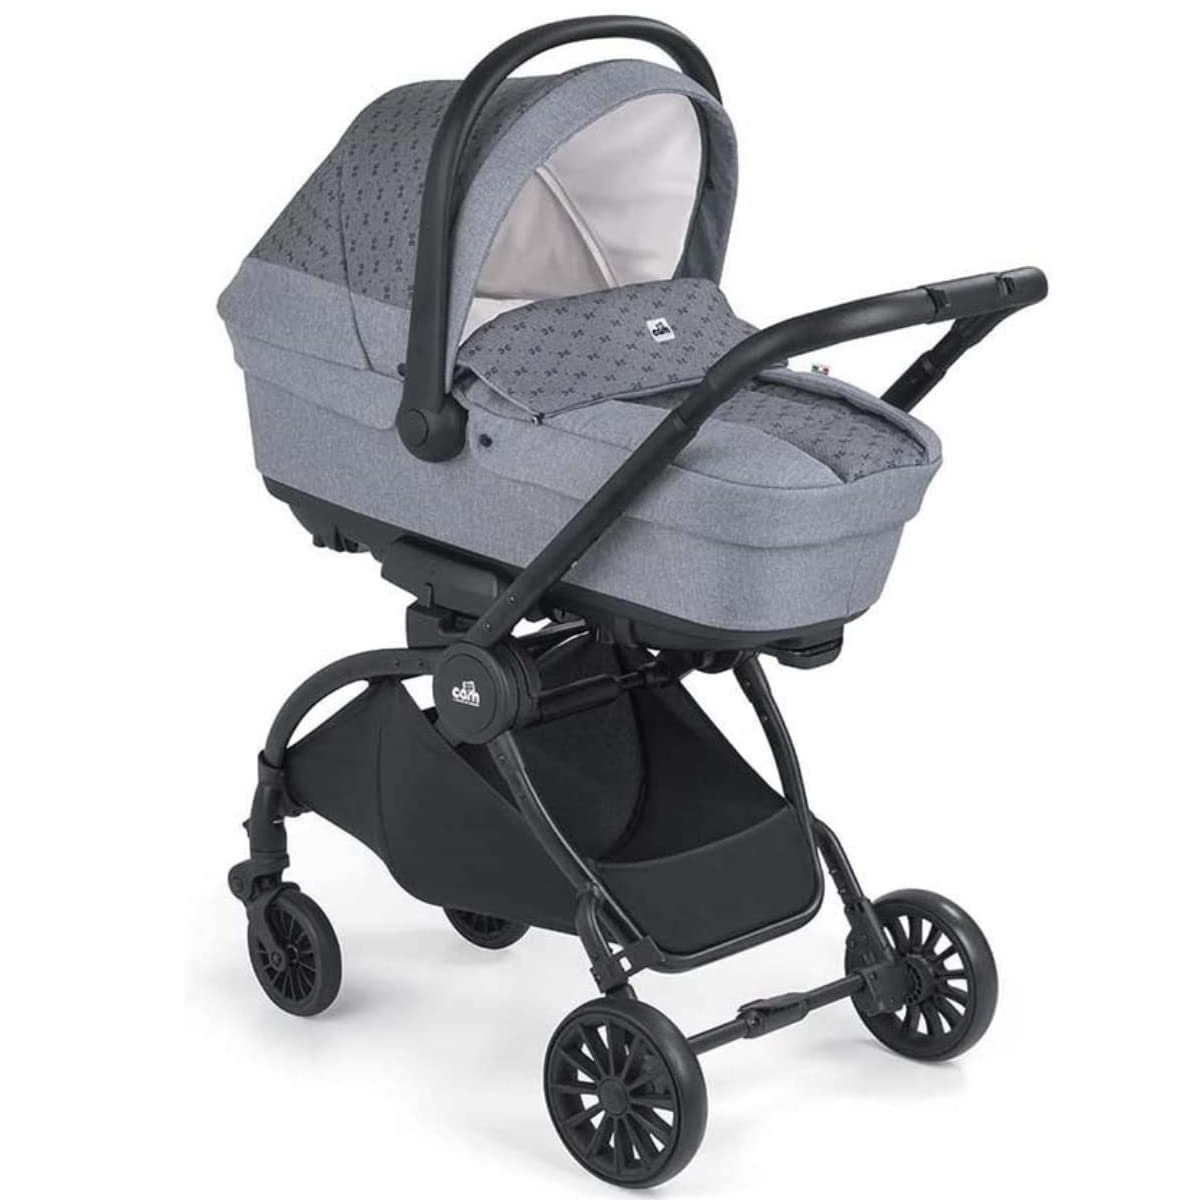 Cam - Vogue Baby Travel System - Gray, From 0 to 4 years old, Spacious Carrycot, Mattress, Hood with extendable sun visor, rocking function, Compact Folding Pushchair, Made in Italy, Safety Harness